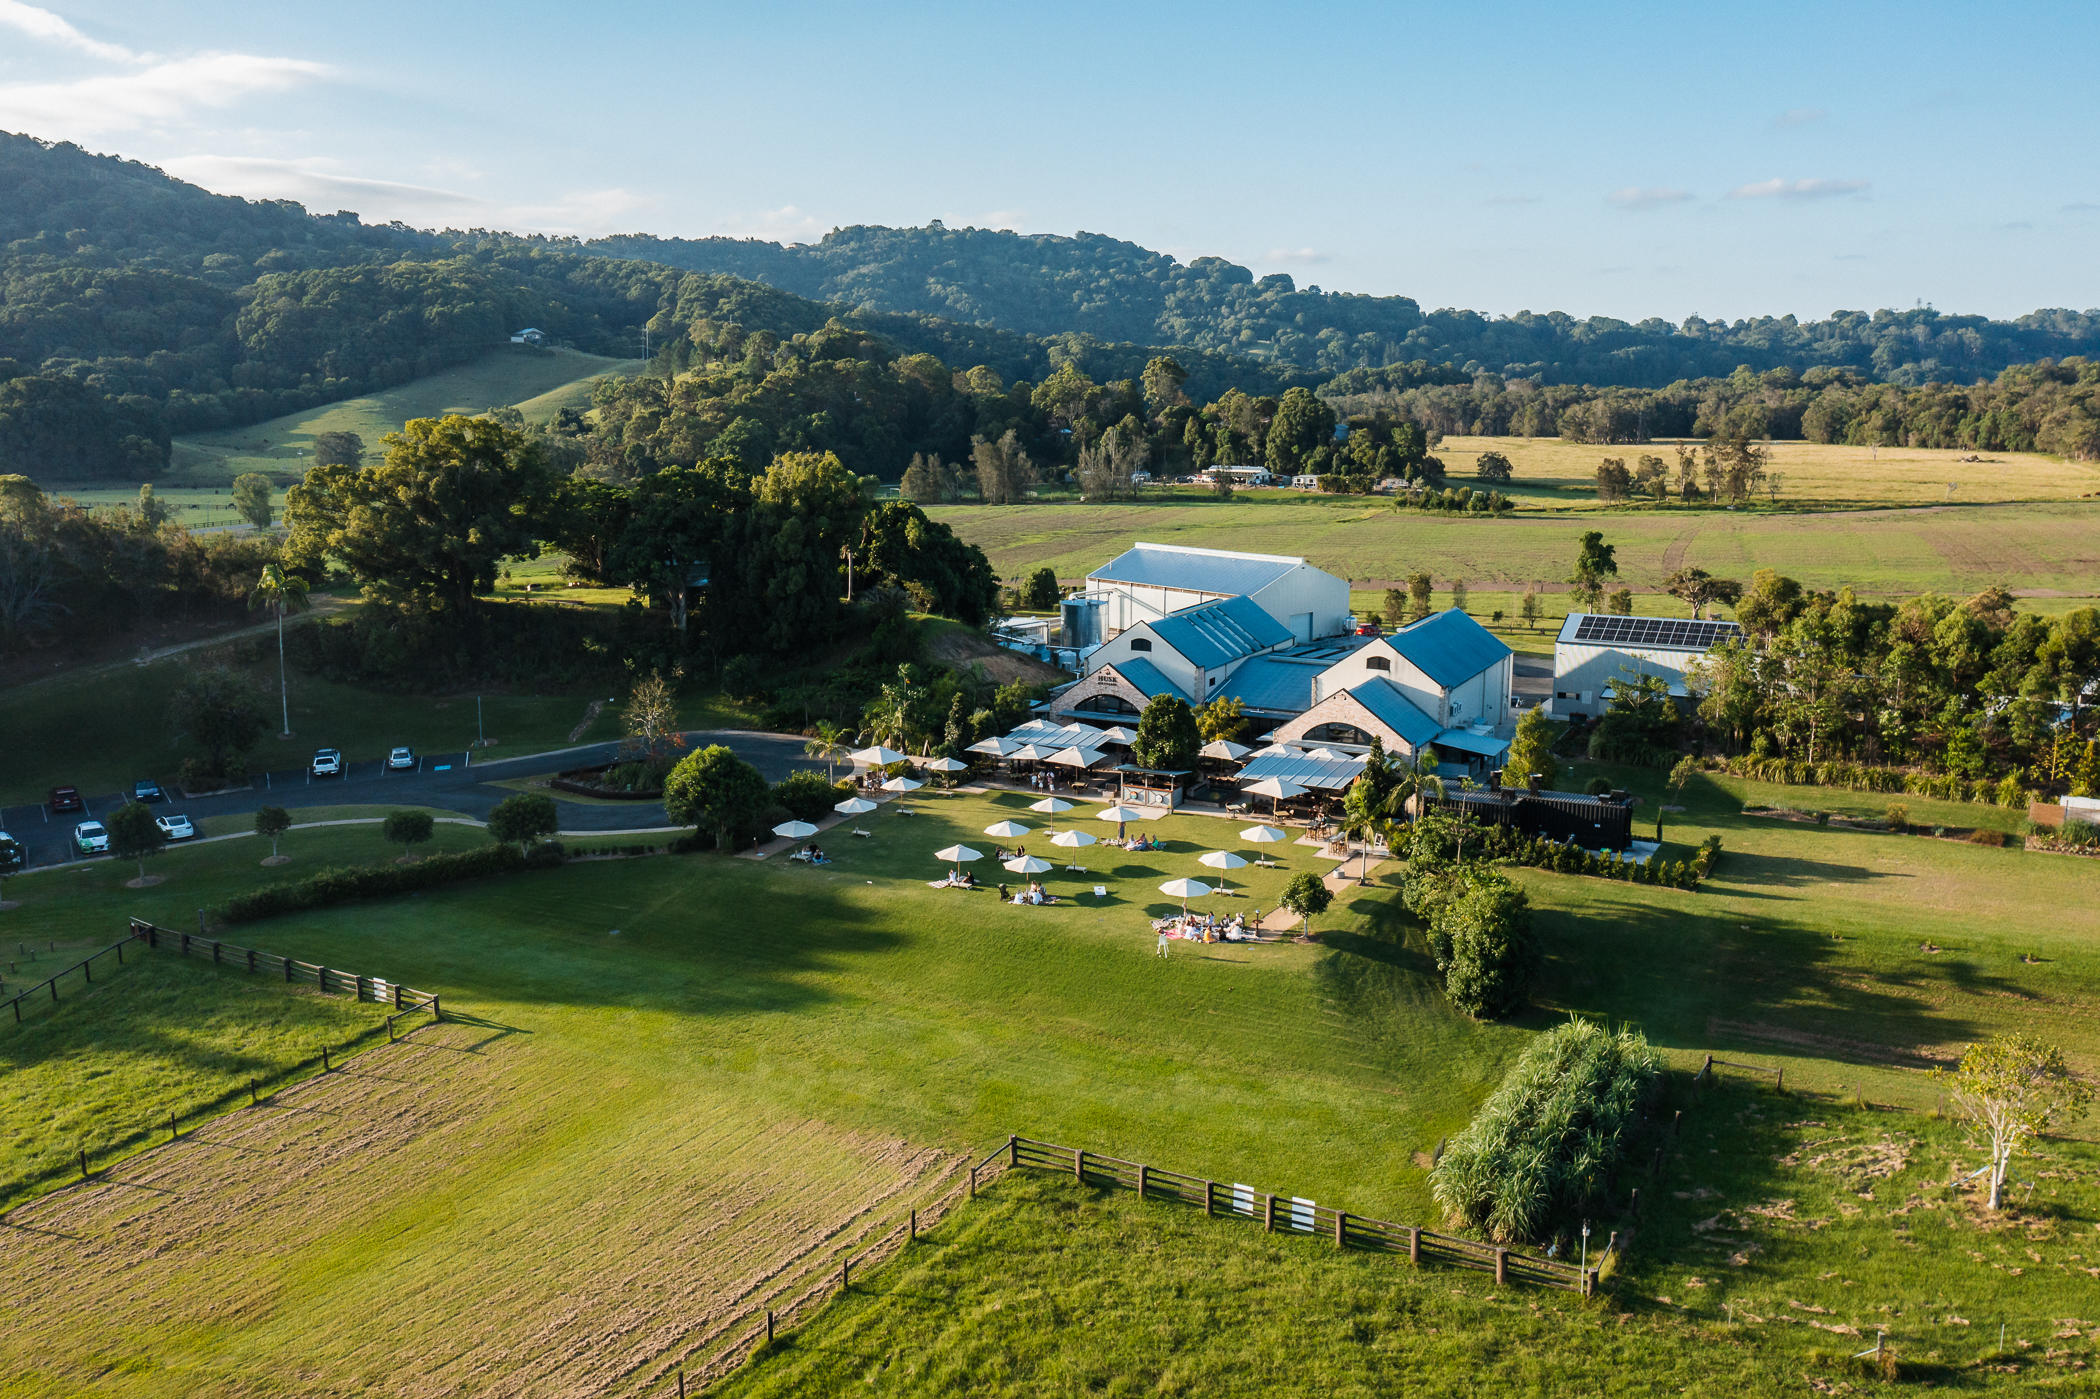 Husk Farm Distillery is set on beautiful grounds, surrounded by150acres of cattle and cane farm.